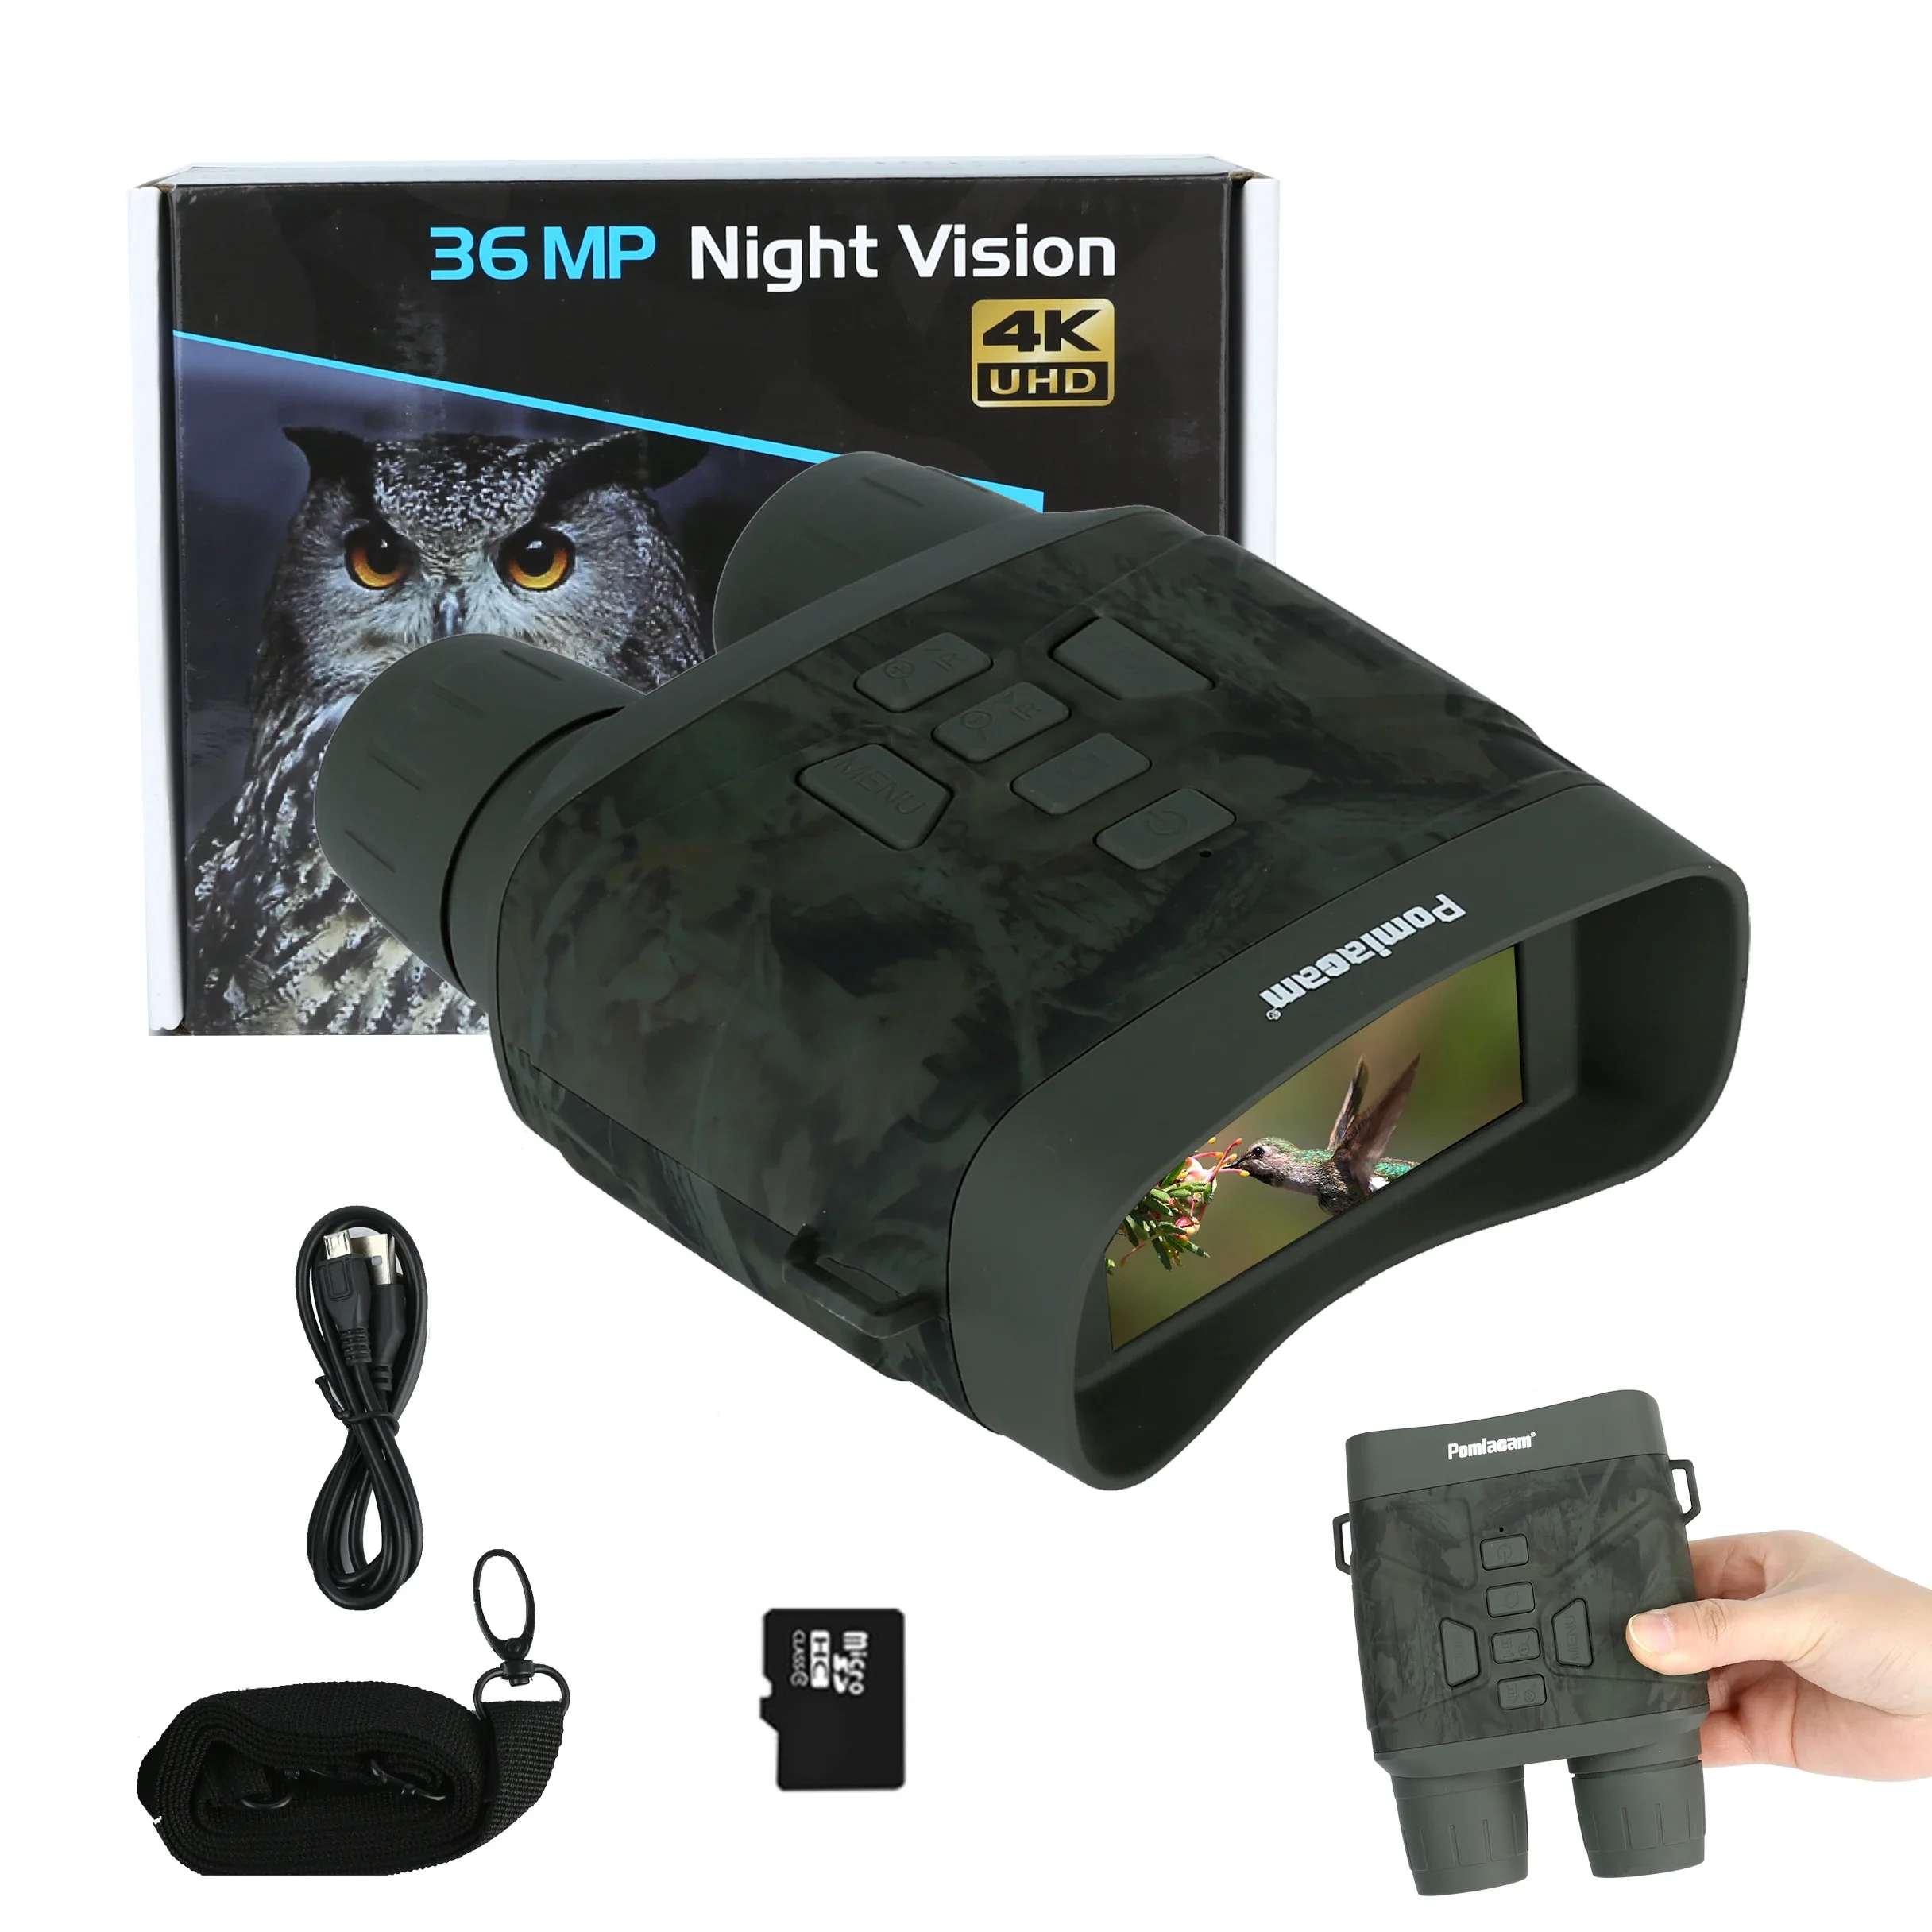 NV4000 Night Vision Binocular 3.0'' Screen 4K 36MP HD Pixel Infrared 5X Digital Zoom Suitable Safety Camera for Outdoor Hunting